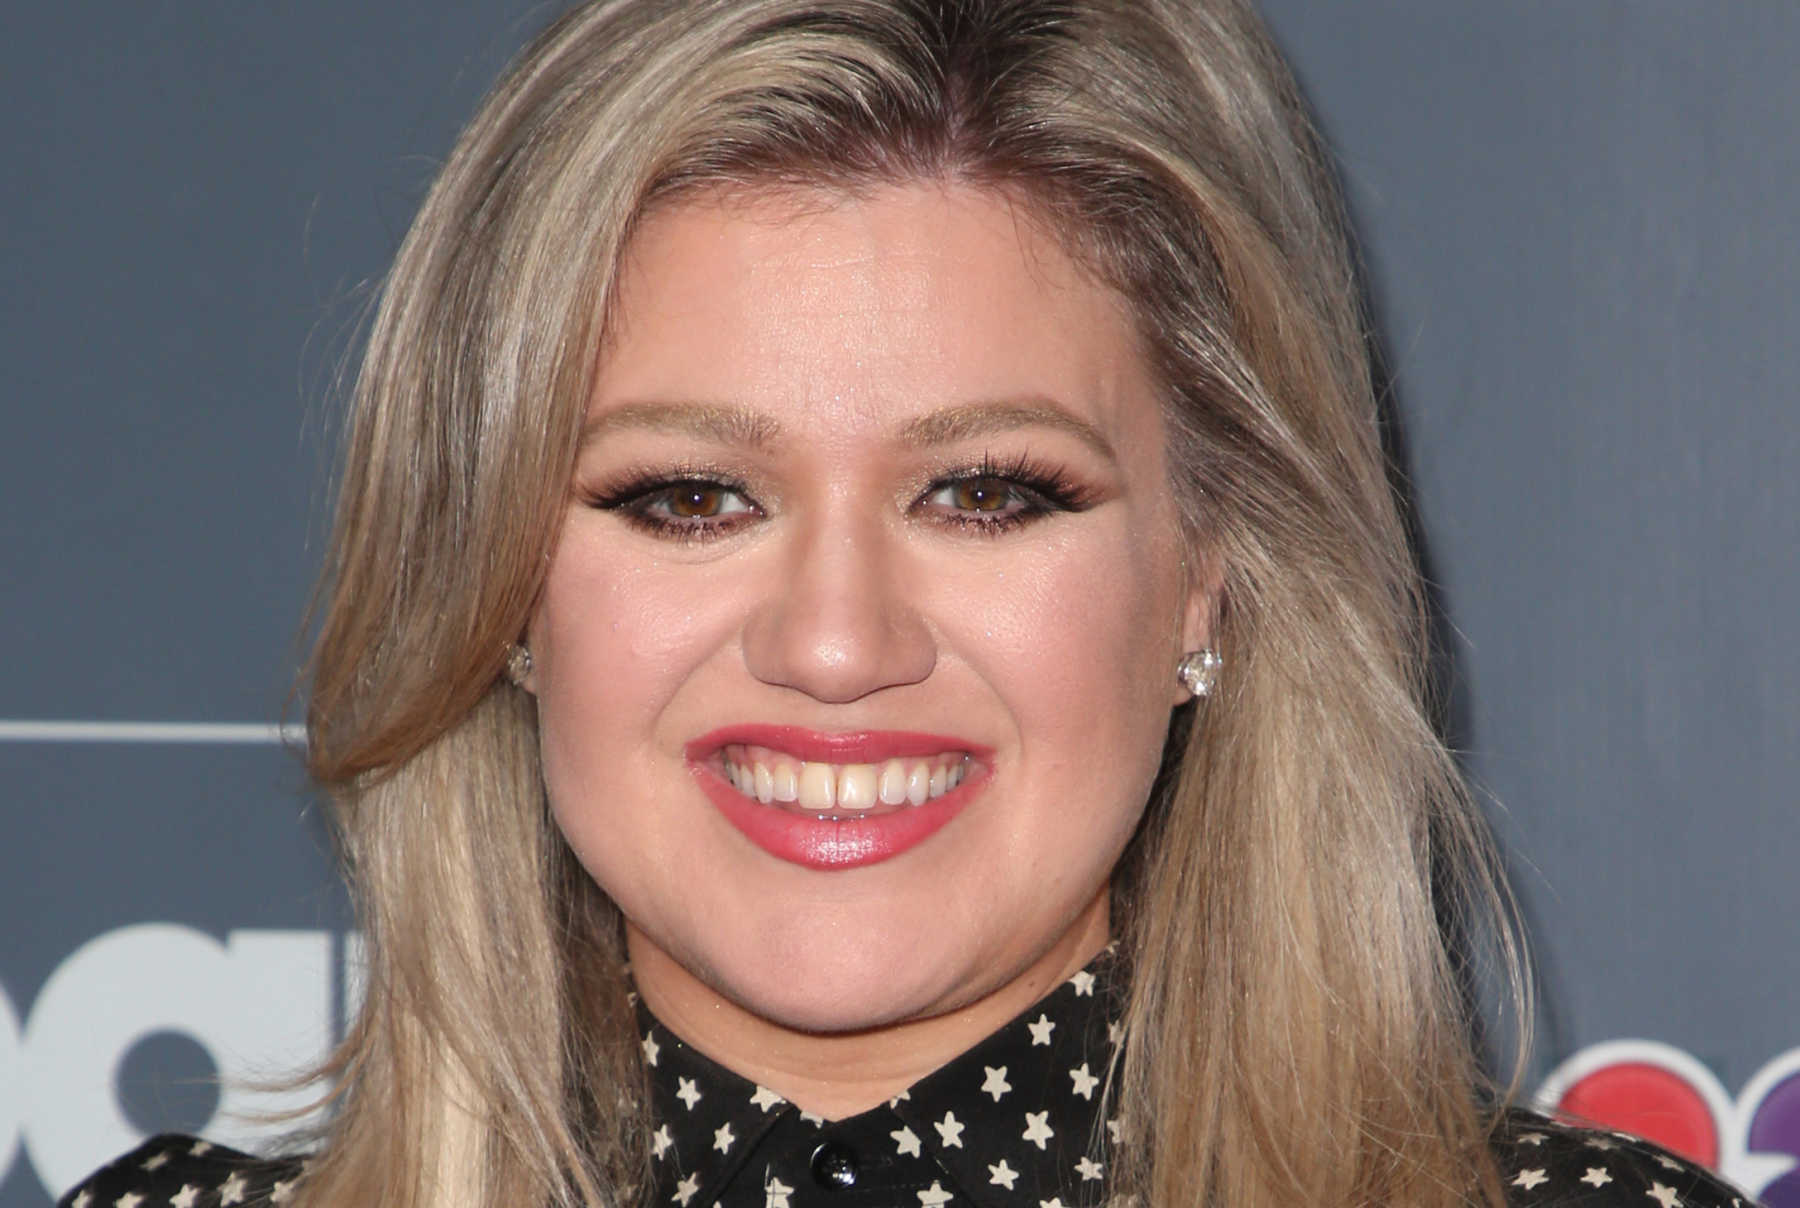 Kelly Clarkson Gets Primary Custody of Her Kids Amid 'Trust' Issues ...